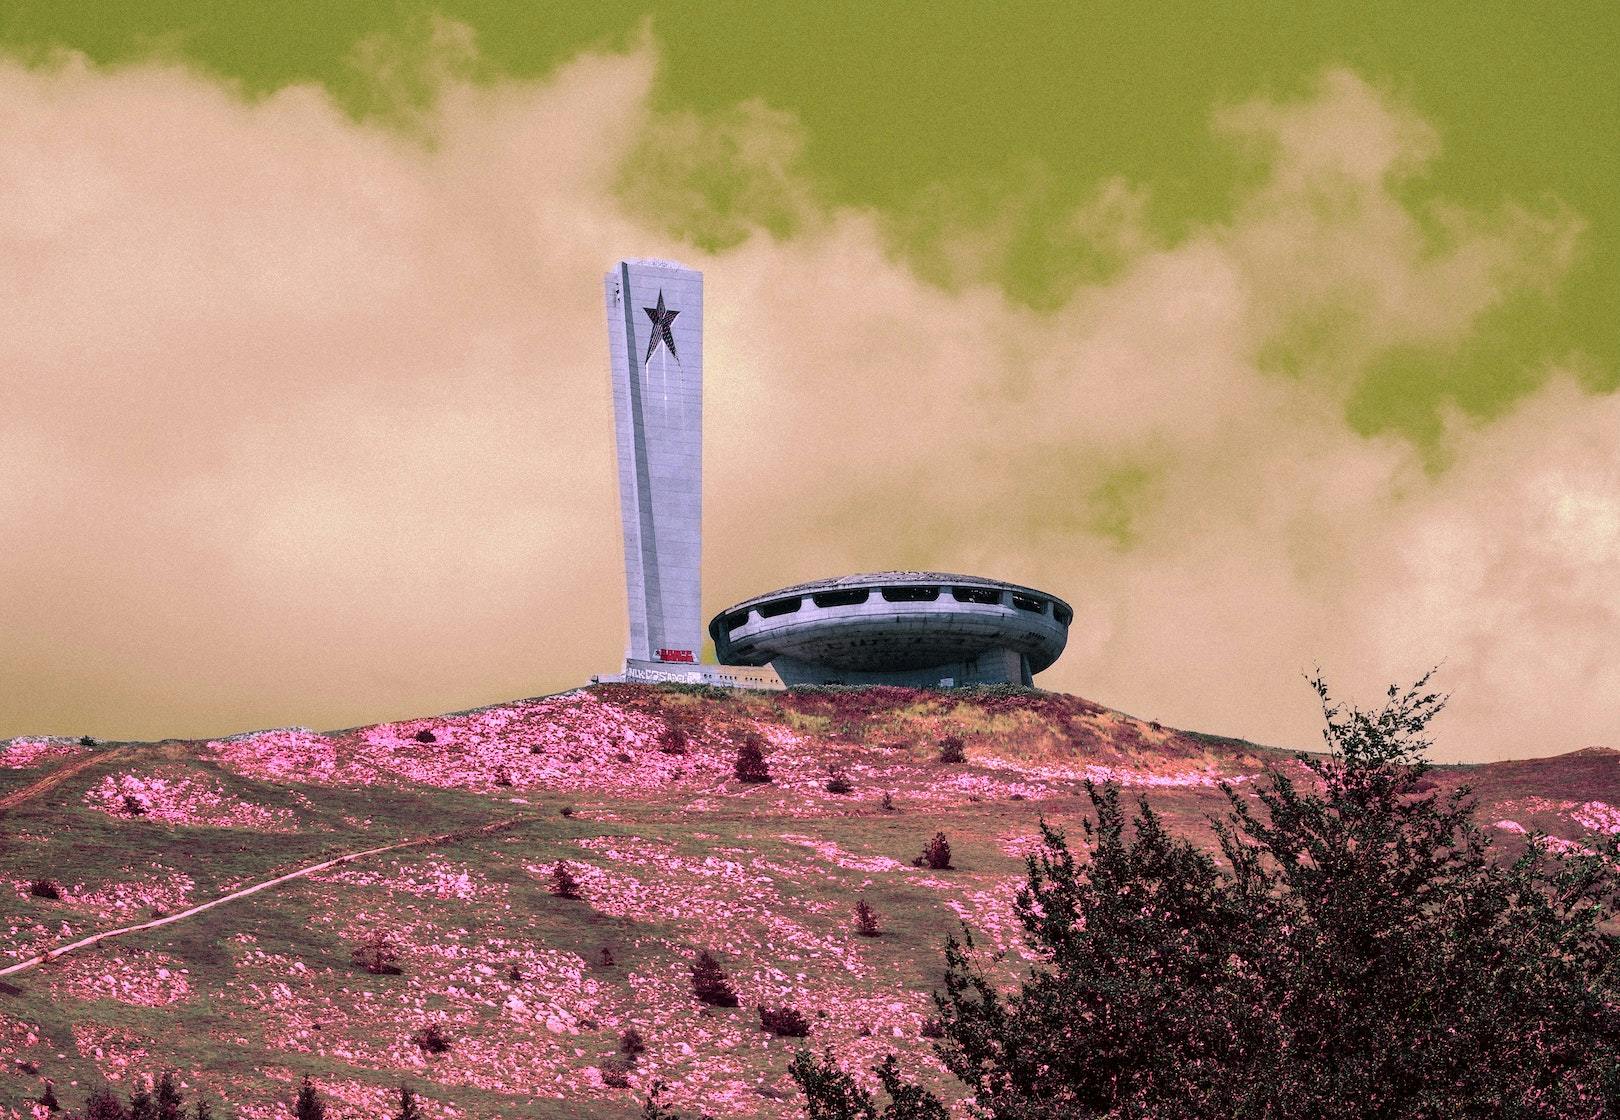 Create sci-fi vibrance meets historical monuments look